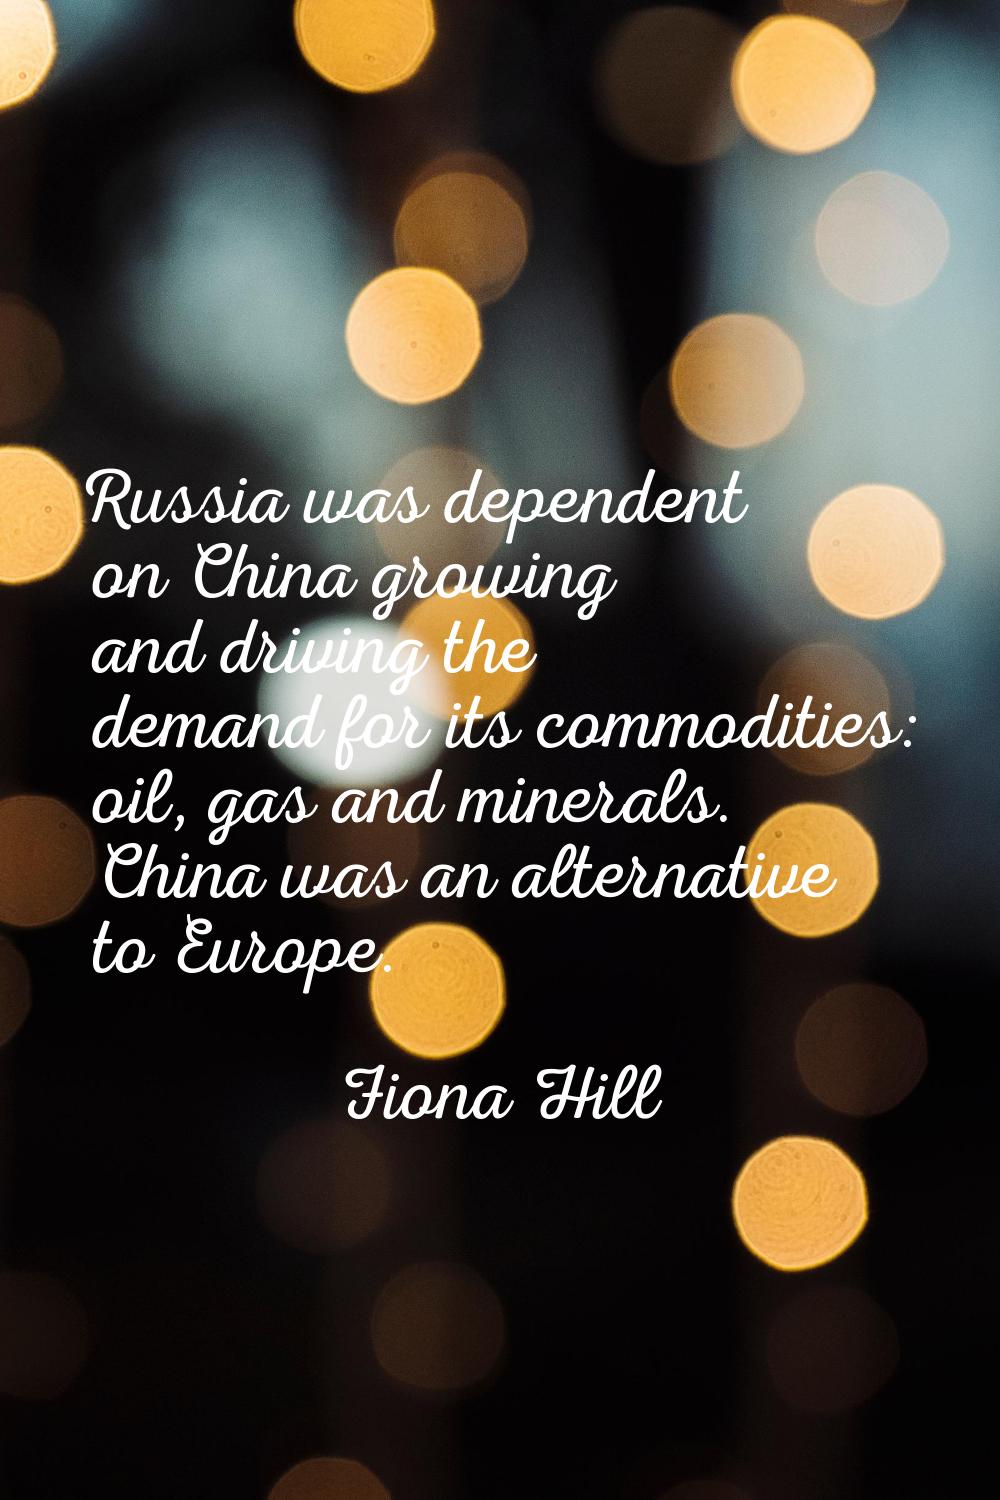 Russia was dependent on China growing and driving the demand for its commodities: oil, gas and mine